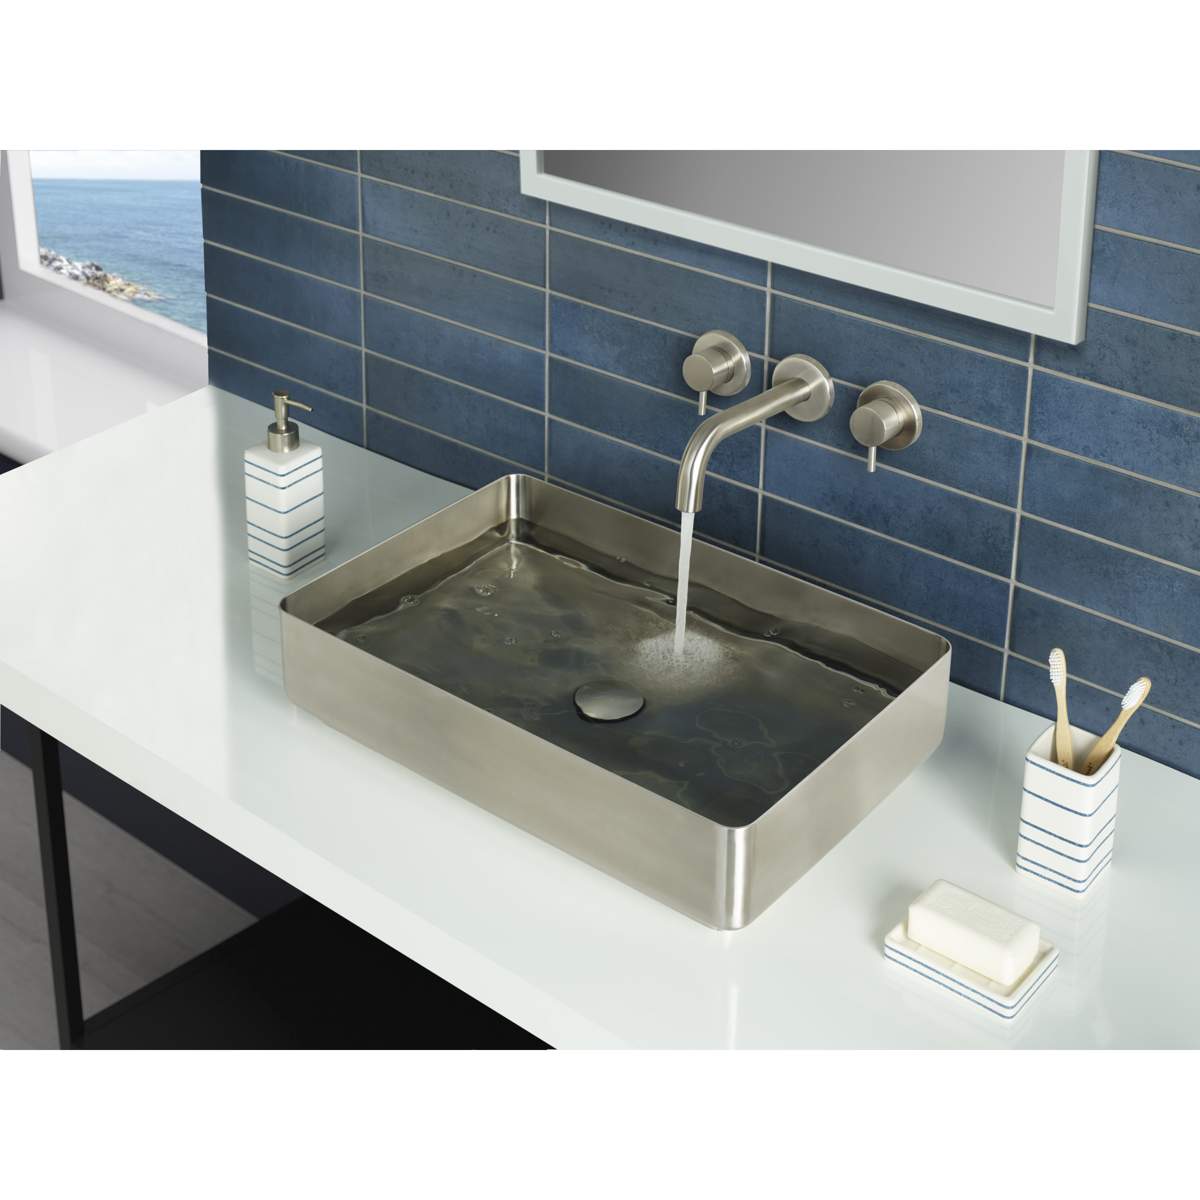 JTP Inox Stainless Steel Grade 316 Counter Top Basin (IXCTS520)